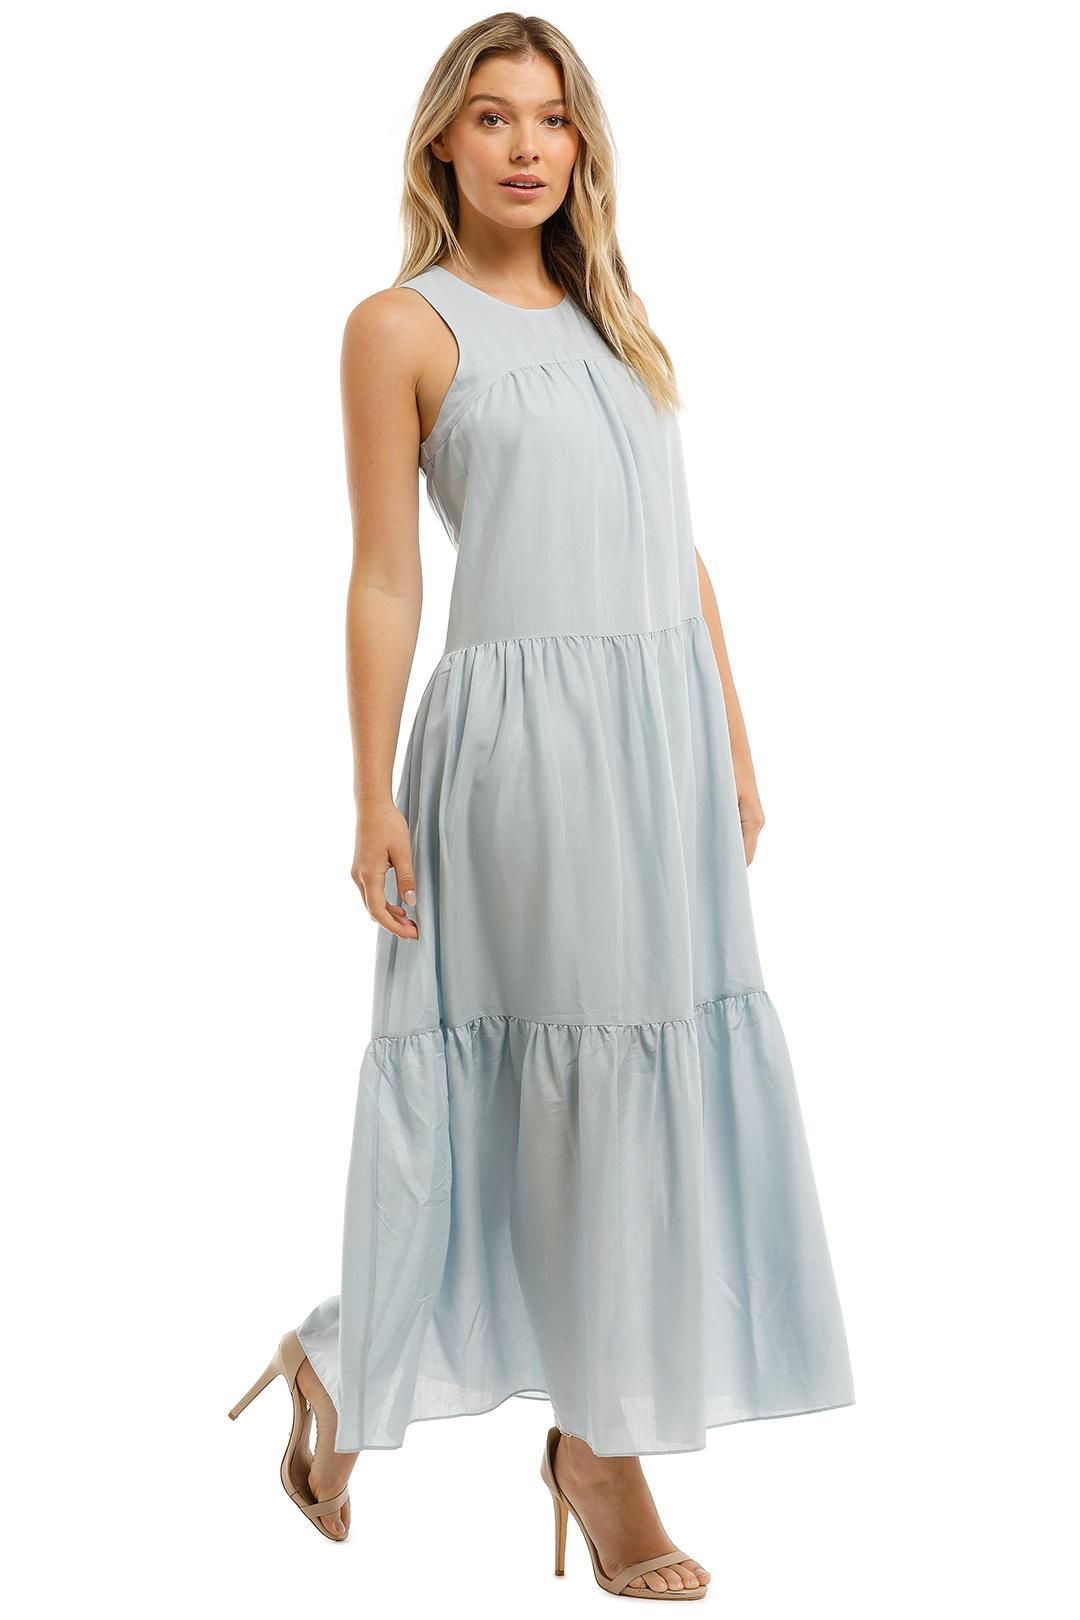 Yoke Tiered Dress in Arctic Blue by Witchery for Hire | GlamCorner